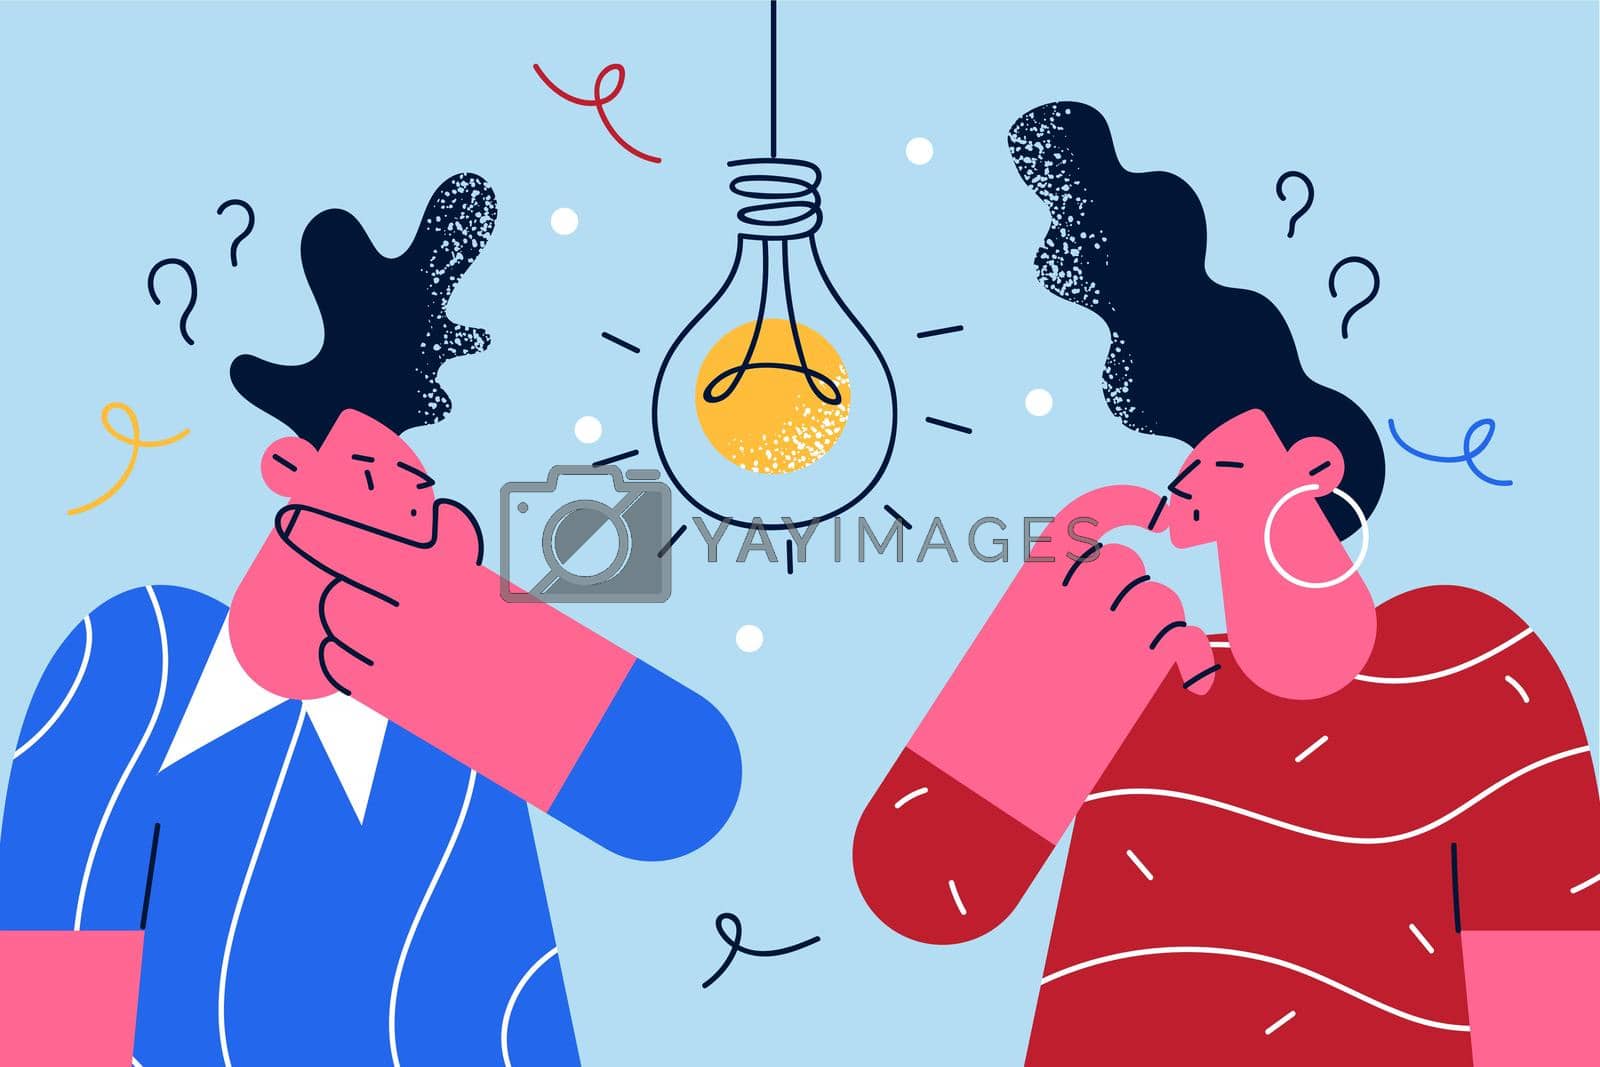 Royalty free image of Having doubts and creative ideas concept by Vasilyeu